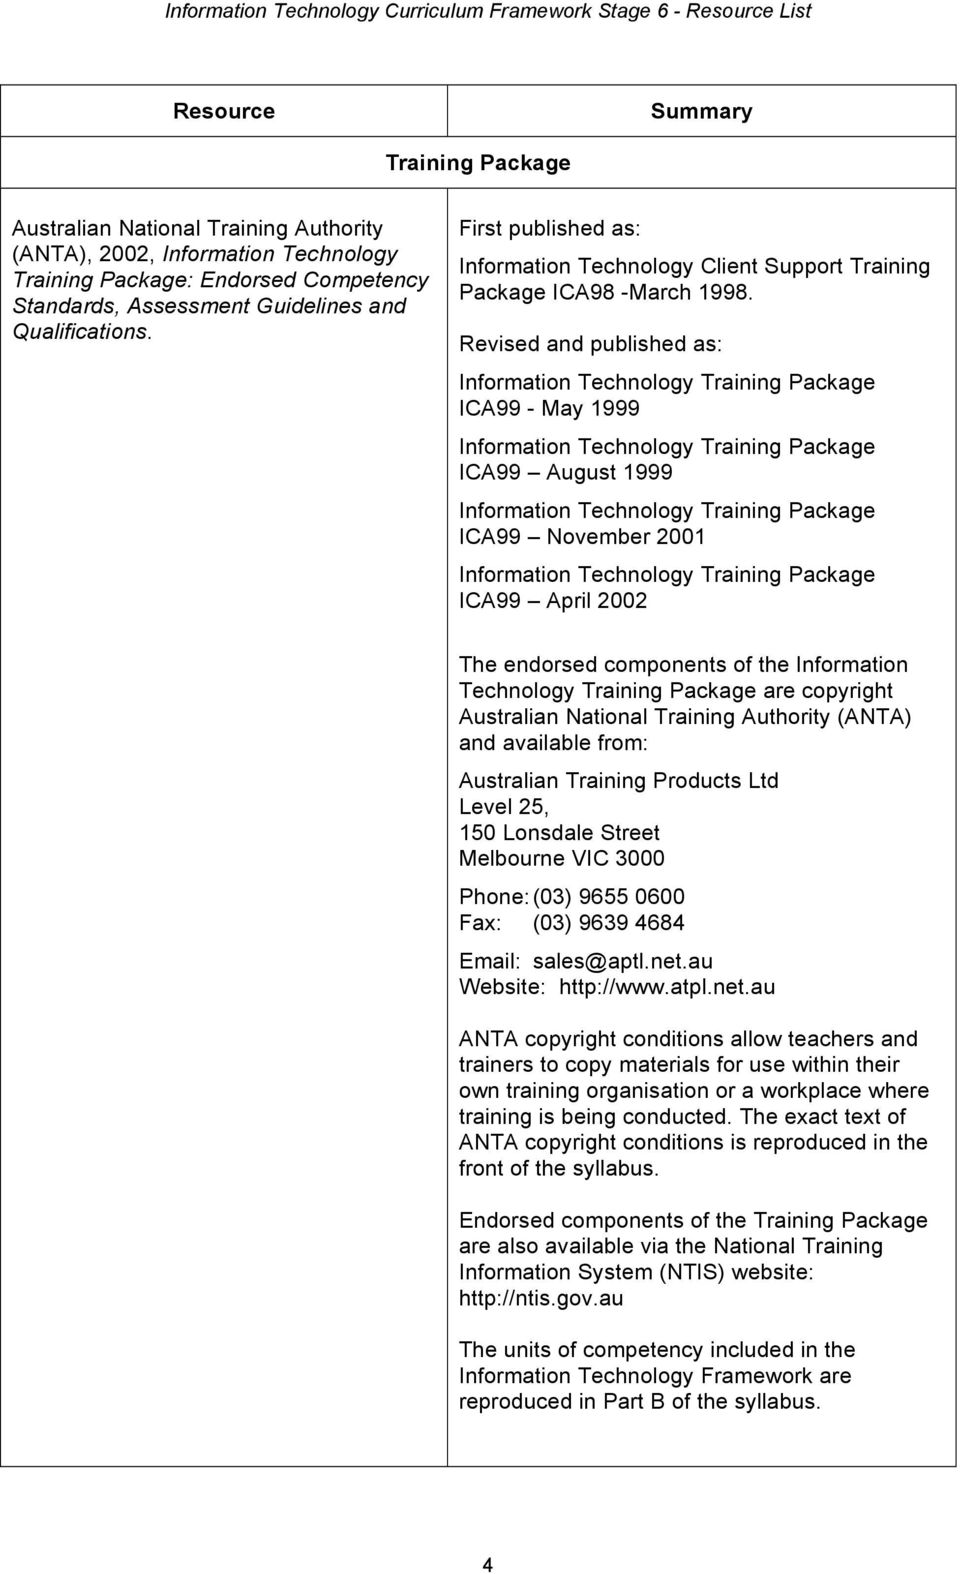 Revised and published as: Information Technology Training Package ICA99 - May 1999 Information Technology Training Package ICA99 August 1999 Information Technology Training Package ICA99 November